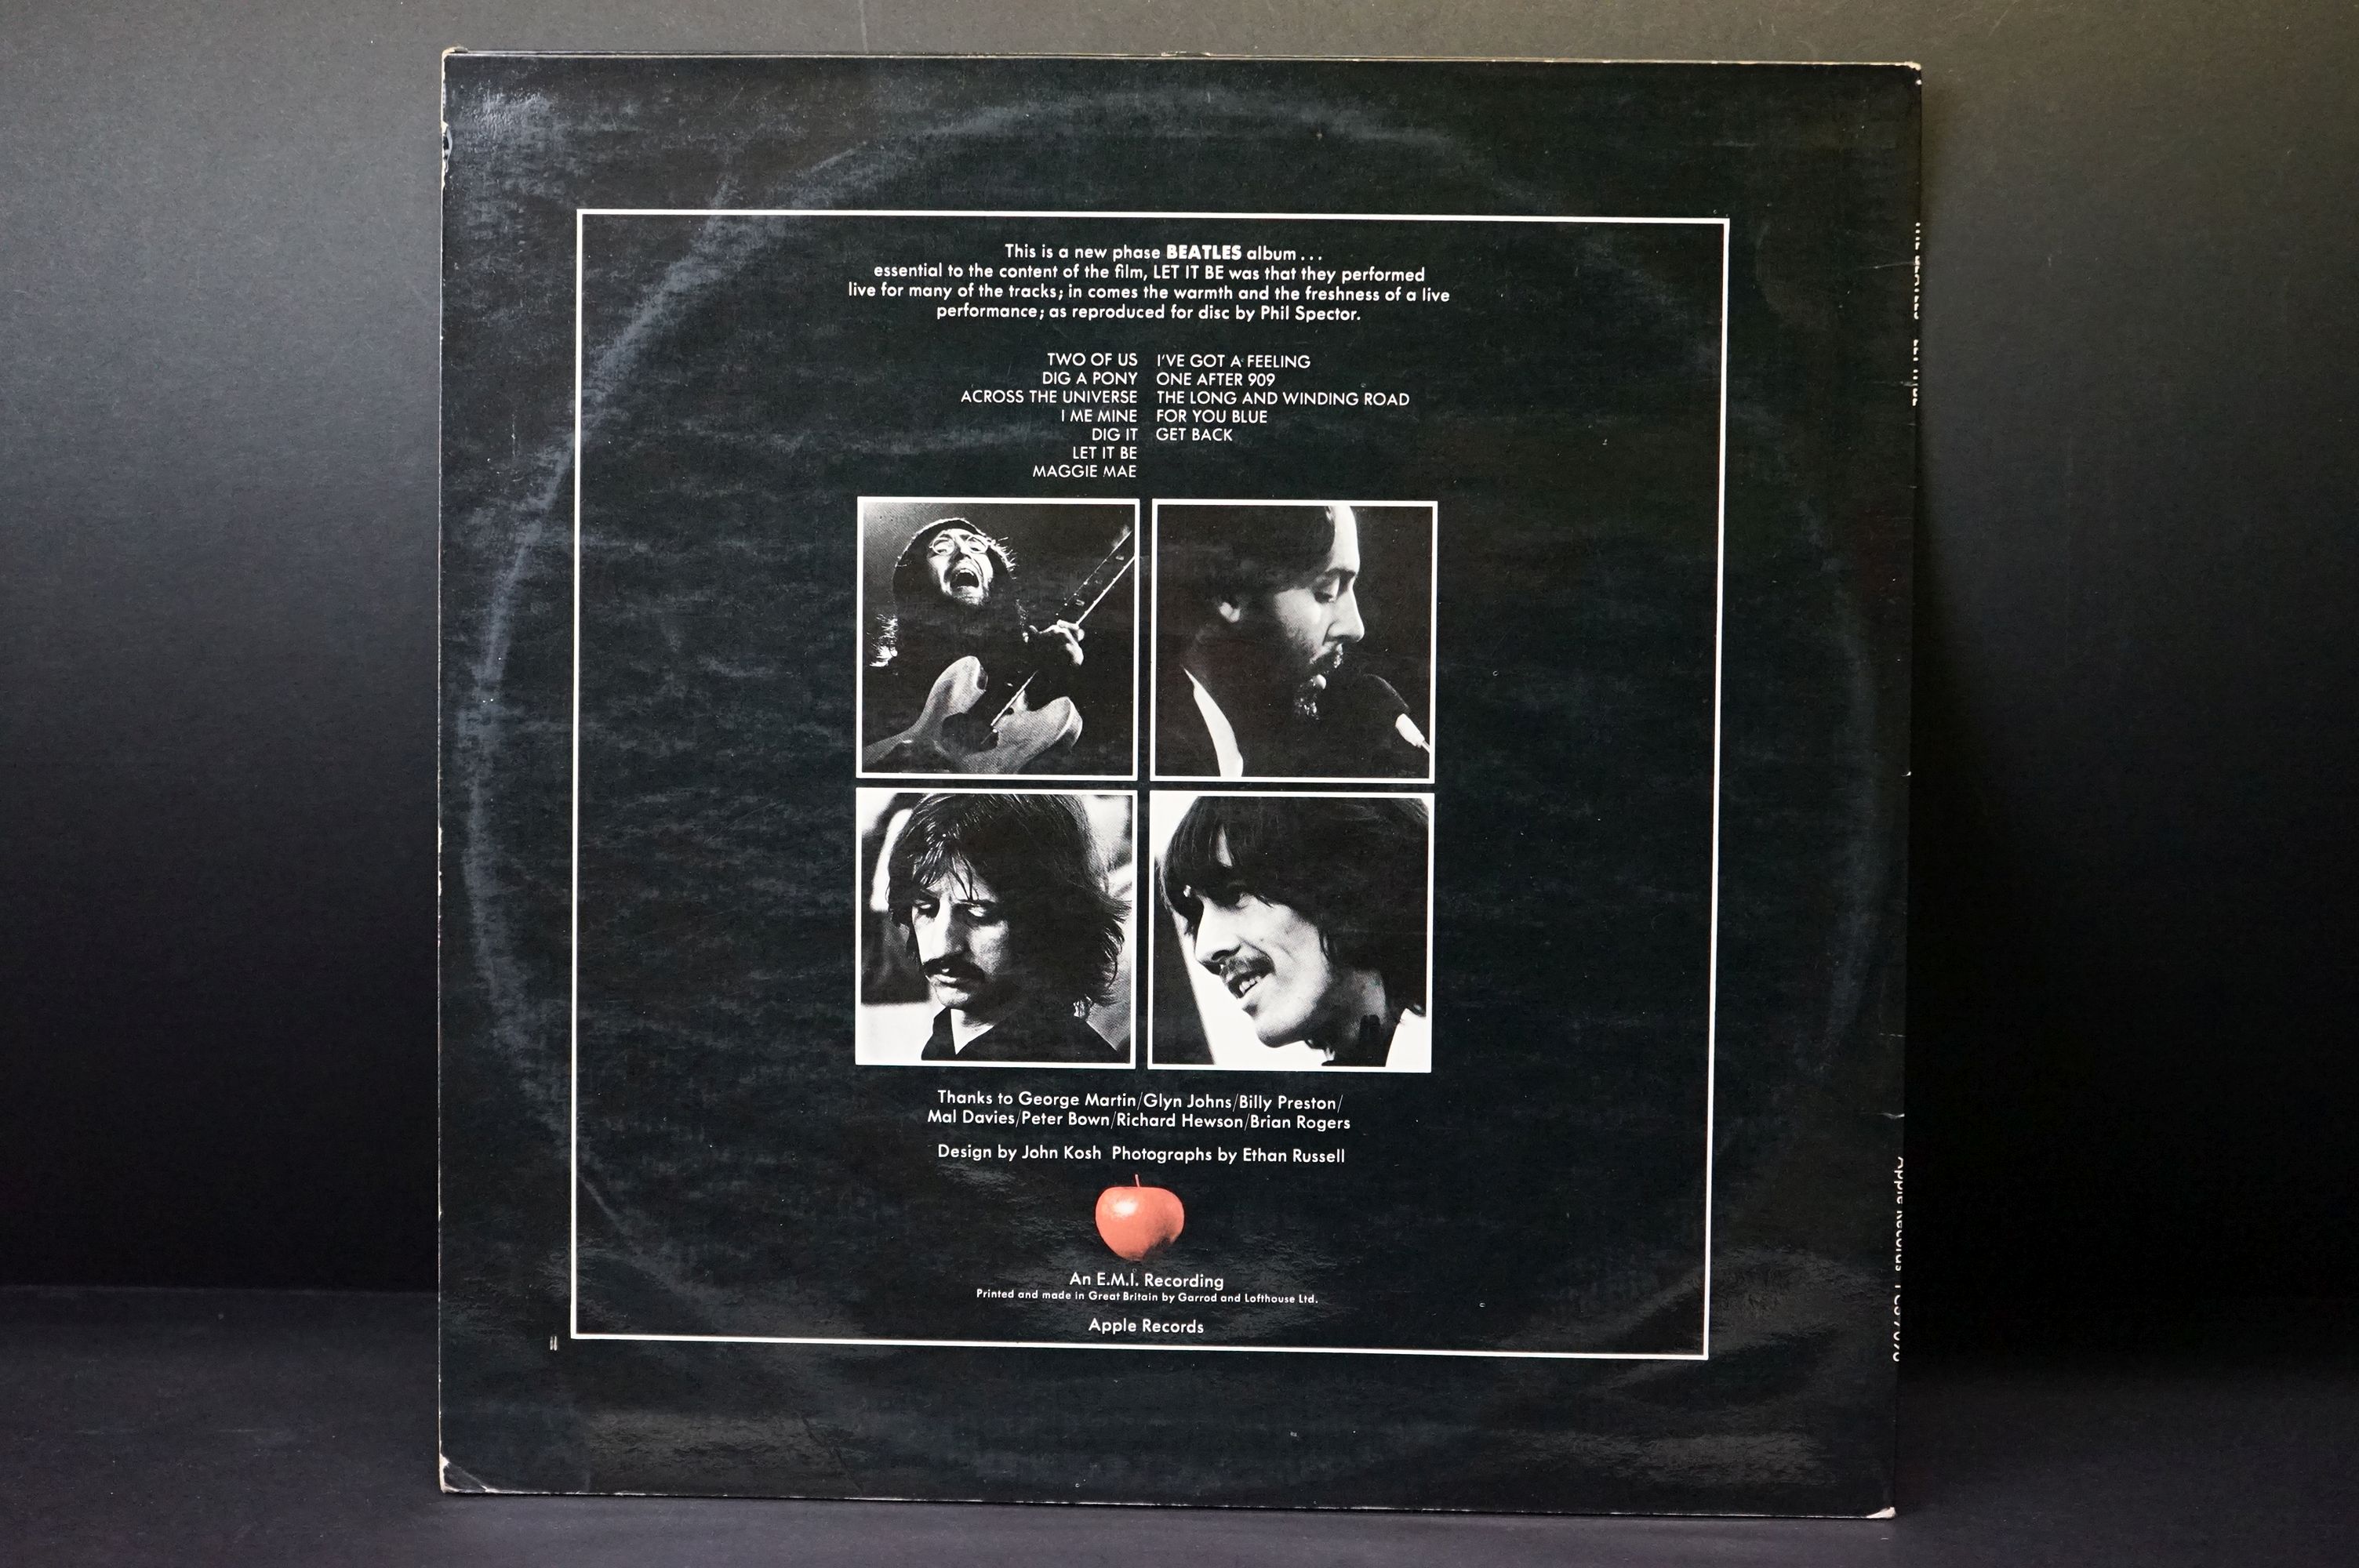 Vinyl - The Beatles Let It Be Box set with LP PCS7090 and Booklet, vinyl vg+, outer box sleeve - Image 9 of 10